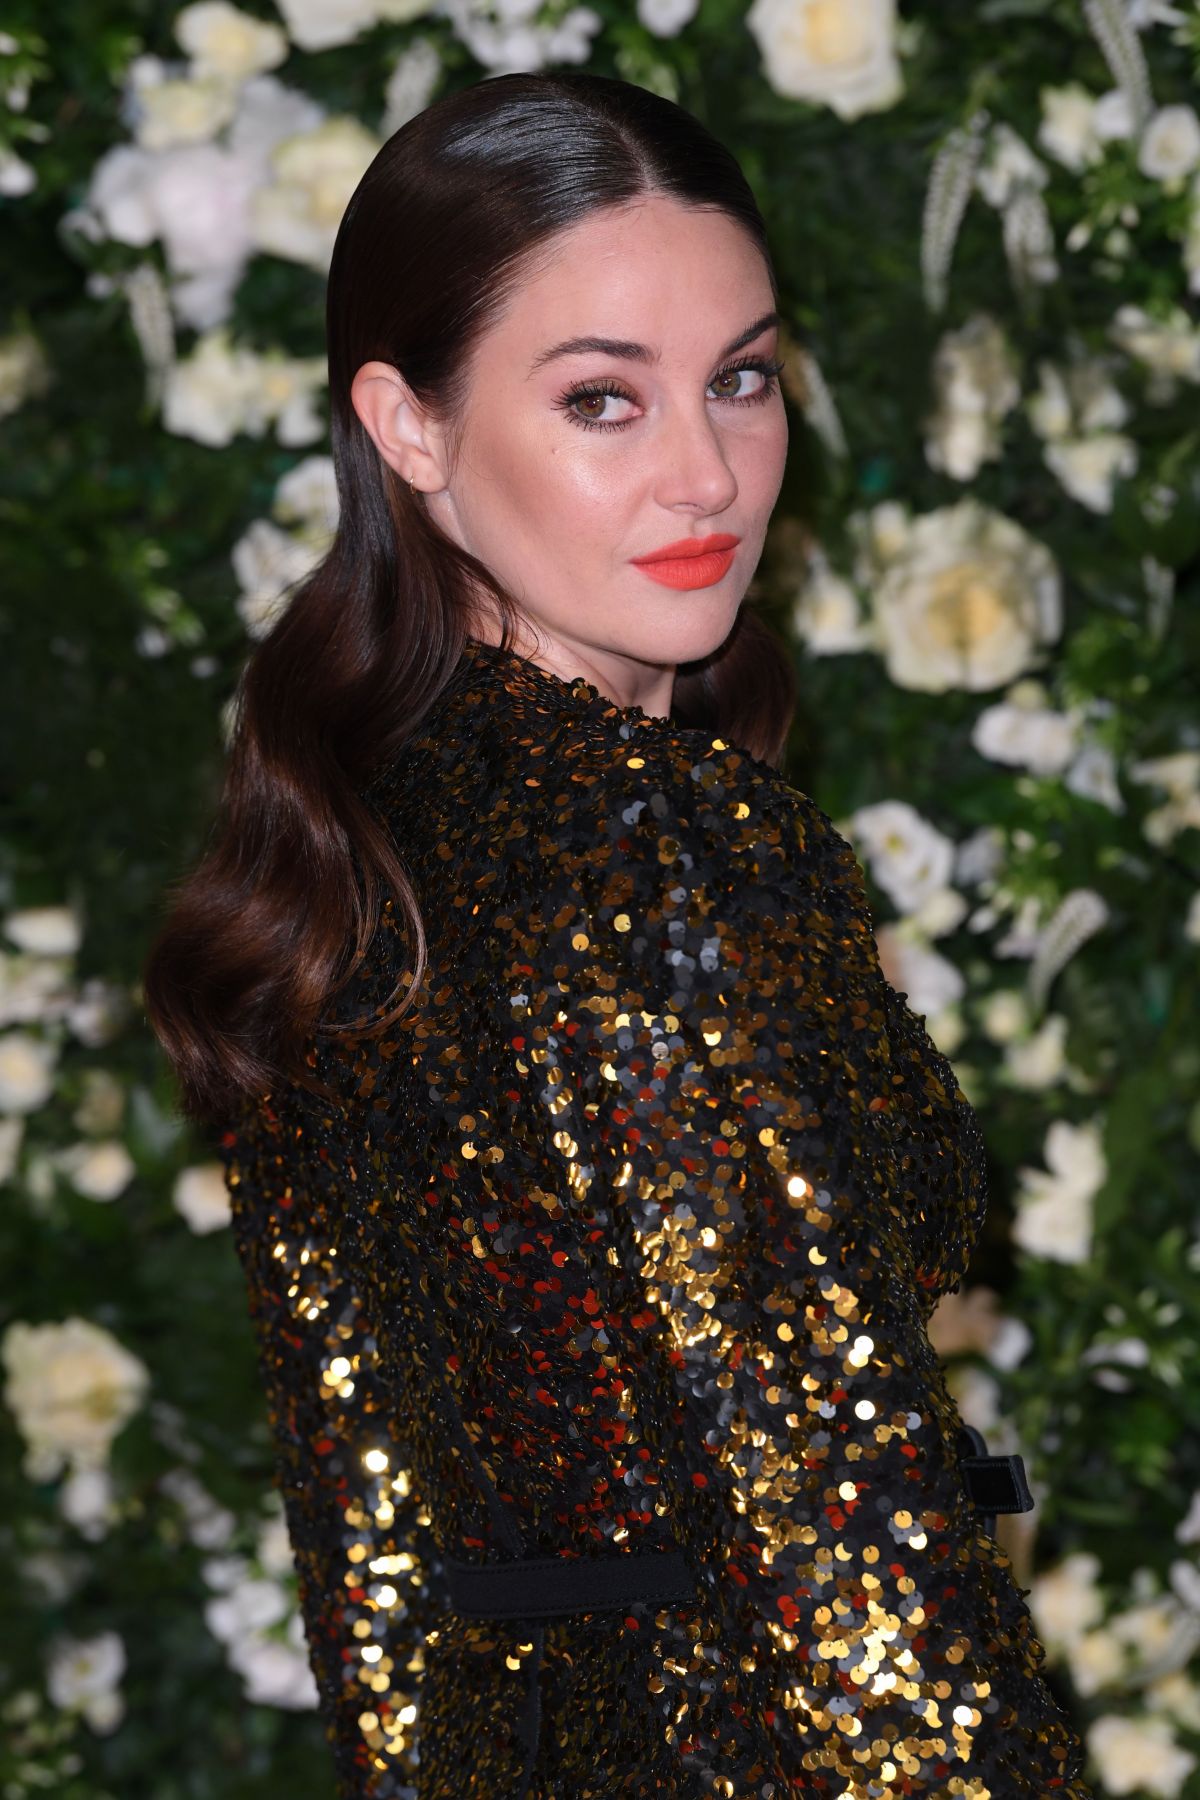 SHAILENE WOODLEY at Charles Finch Filmmakers Dinner in Cannes 05/17/2019 - HawtCelebs